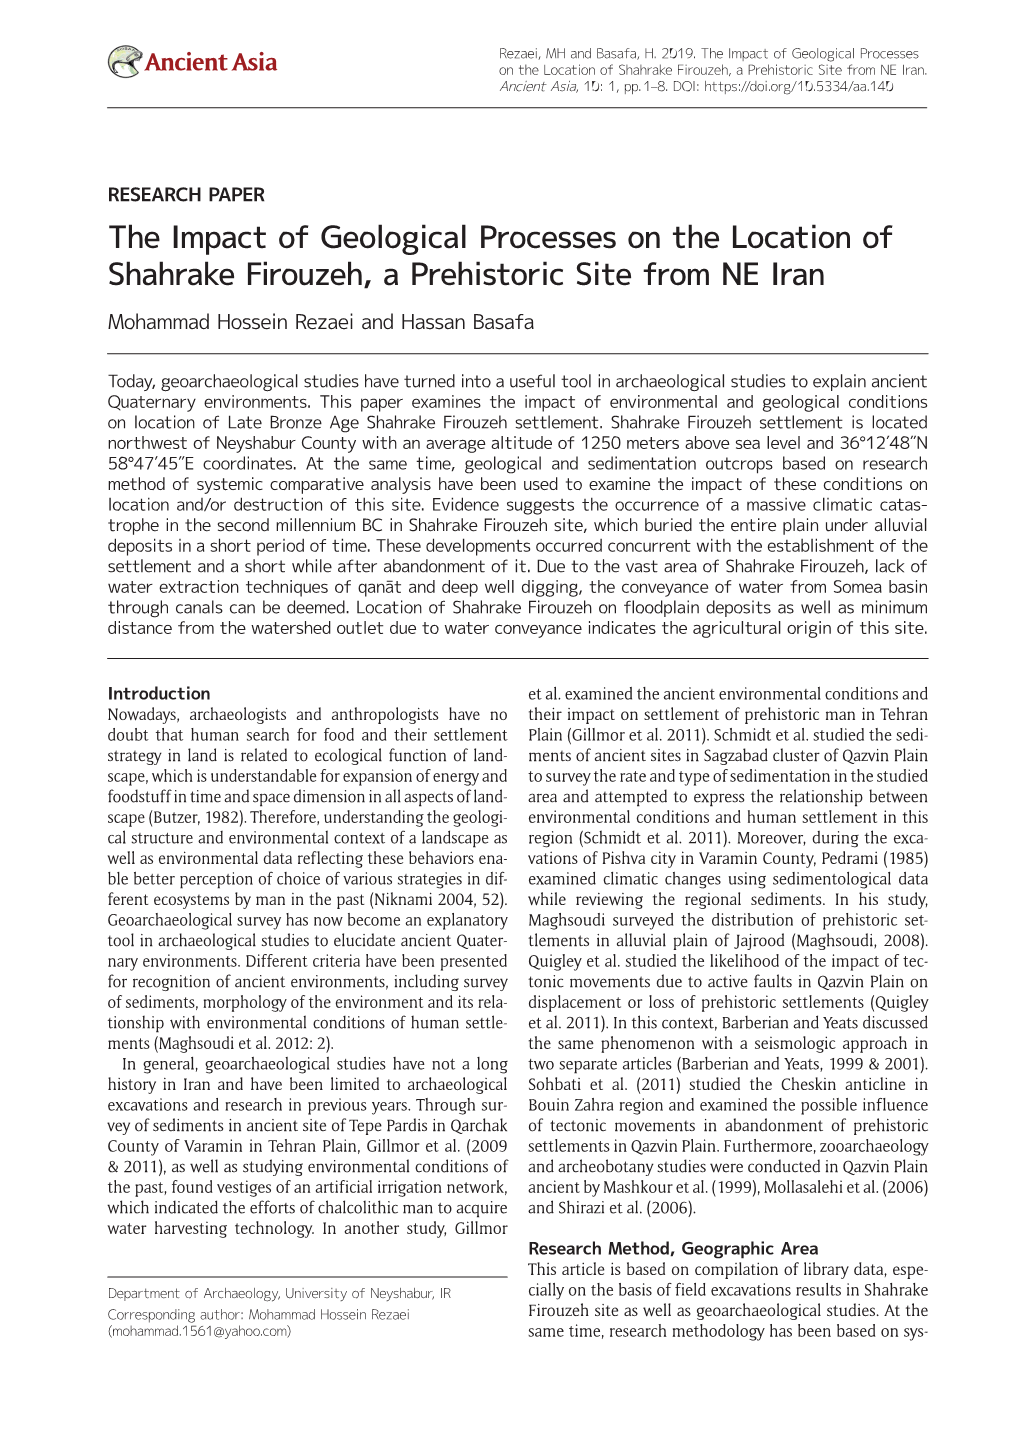 The Impact of Geological Processes on the Location of Shahrake Firouzeh, a Prehistoric Site from NE Iran Mohammad Hossein Rezaei and Hassan Basafa